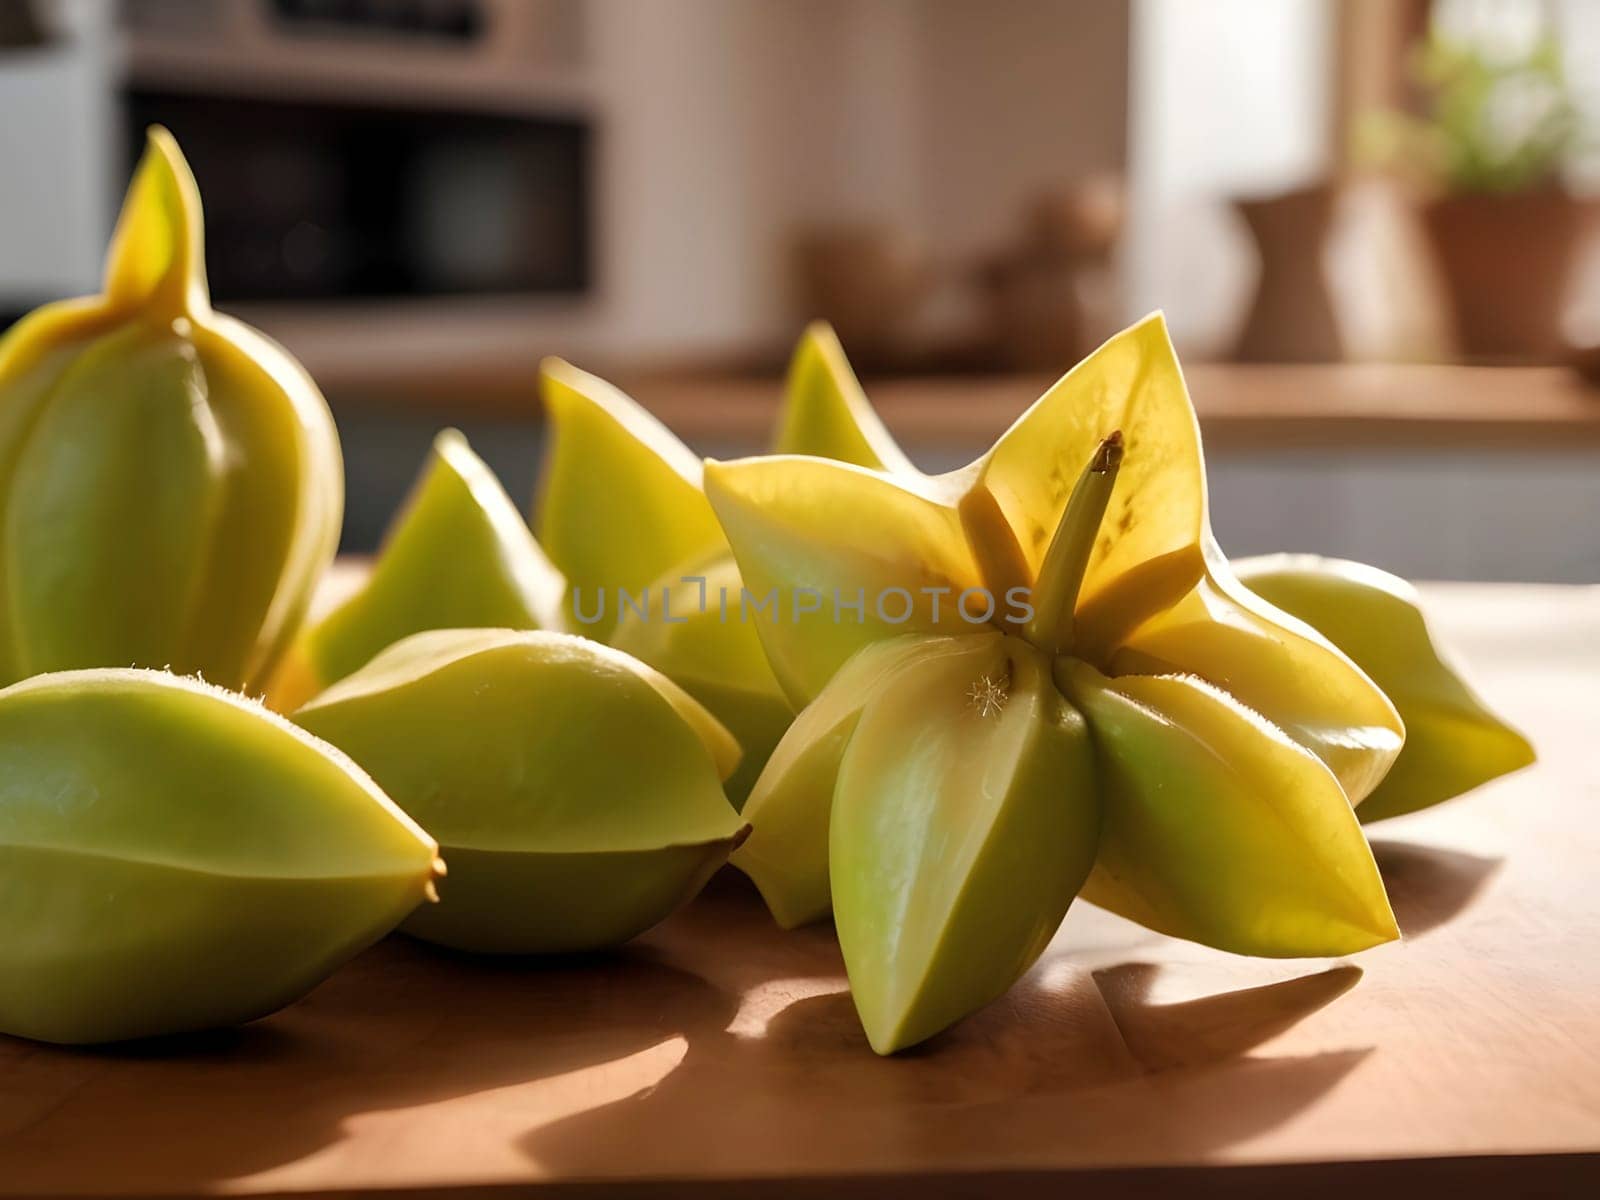 A Culinary Oasis: Star Fruit Bathed in Afternoon Light against a Blurry Kitchen Backdrop by mailos